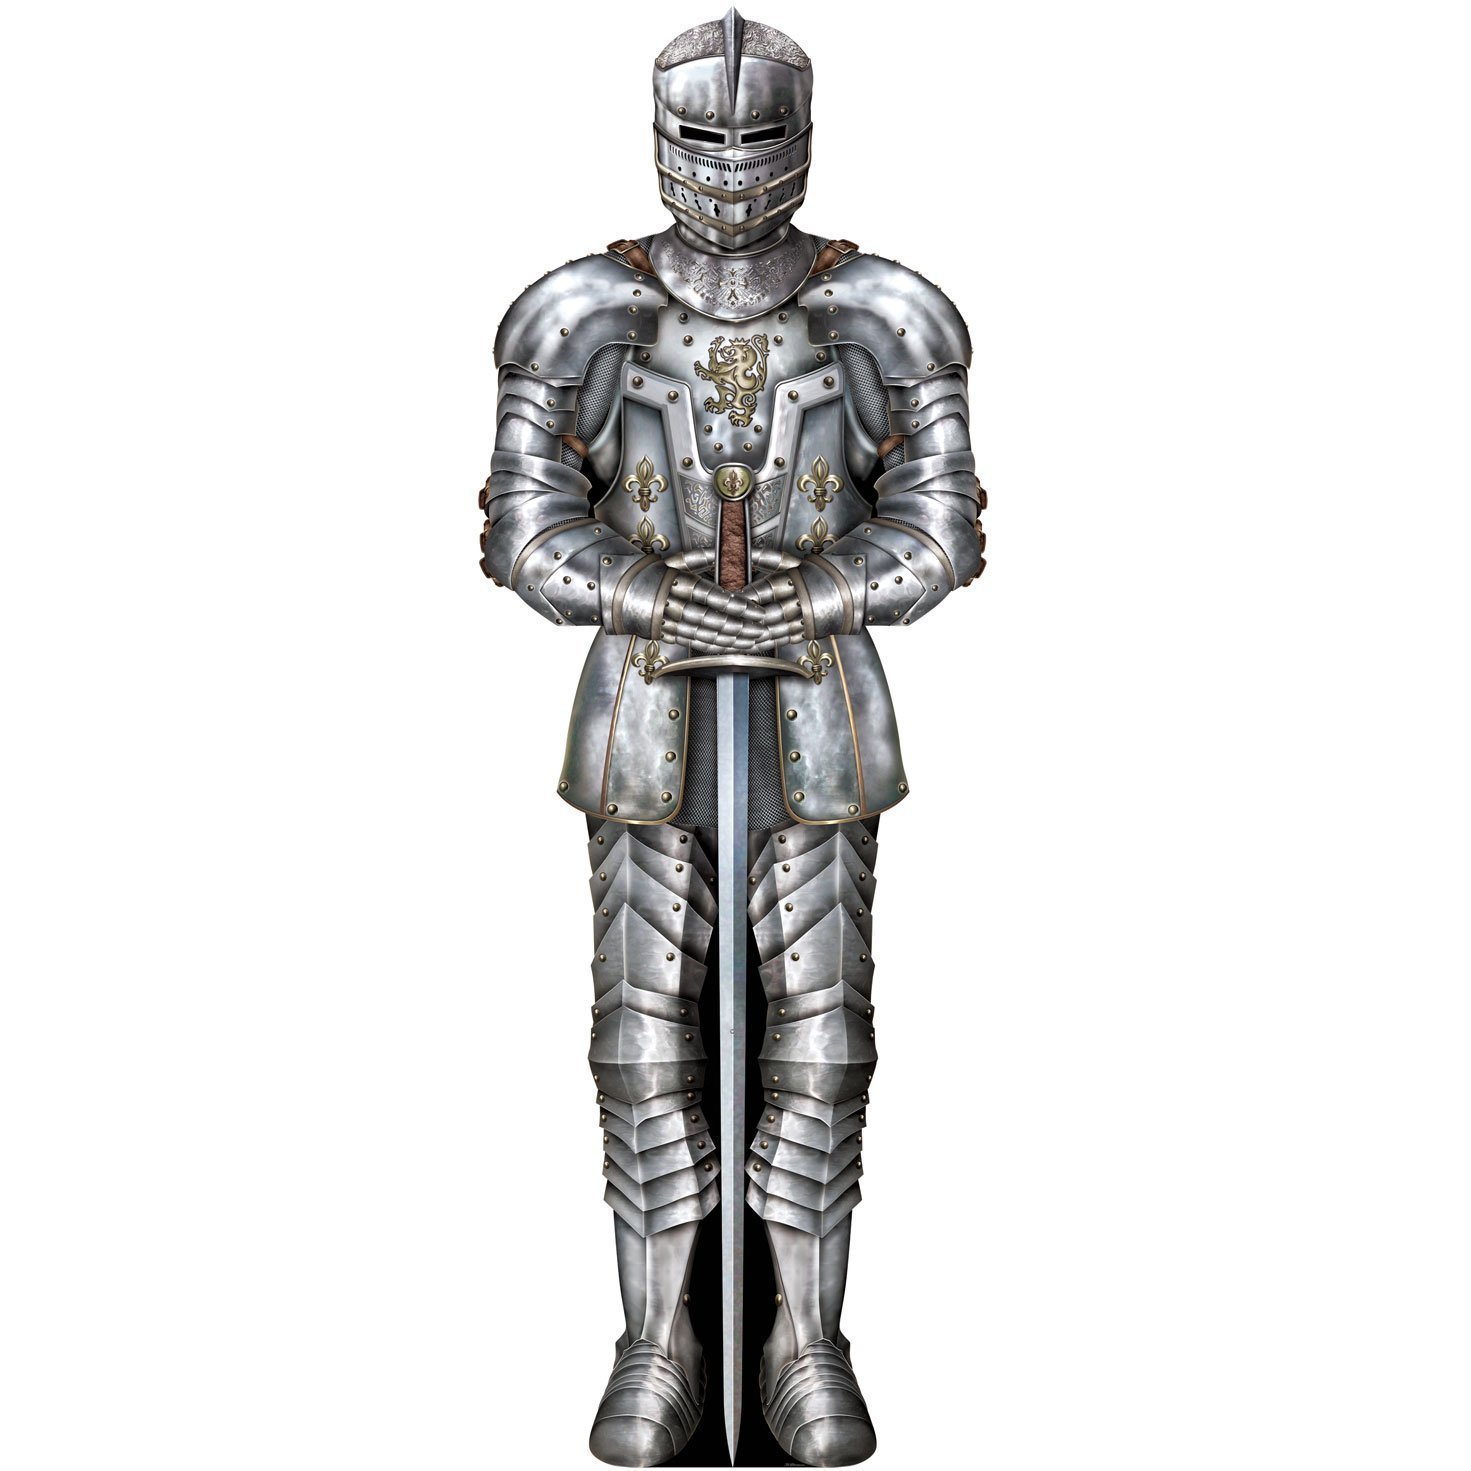 Amazon.com: Beistle 57466 Jointed Suit of Armor, 6-Feet: Kitchen ...